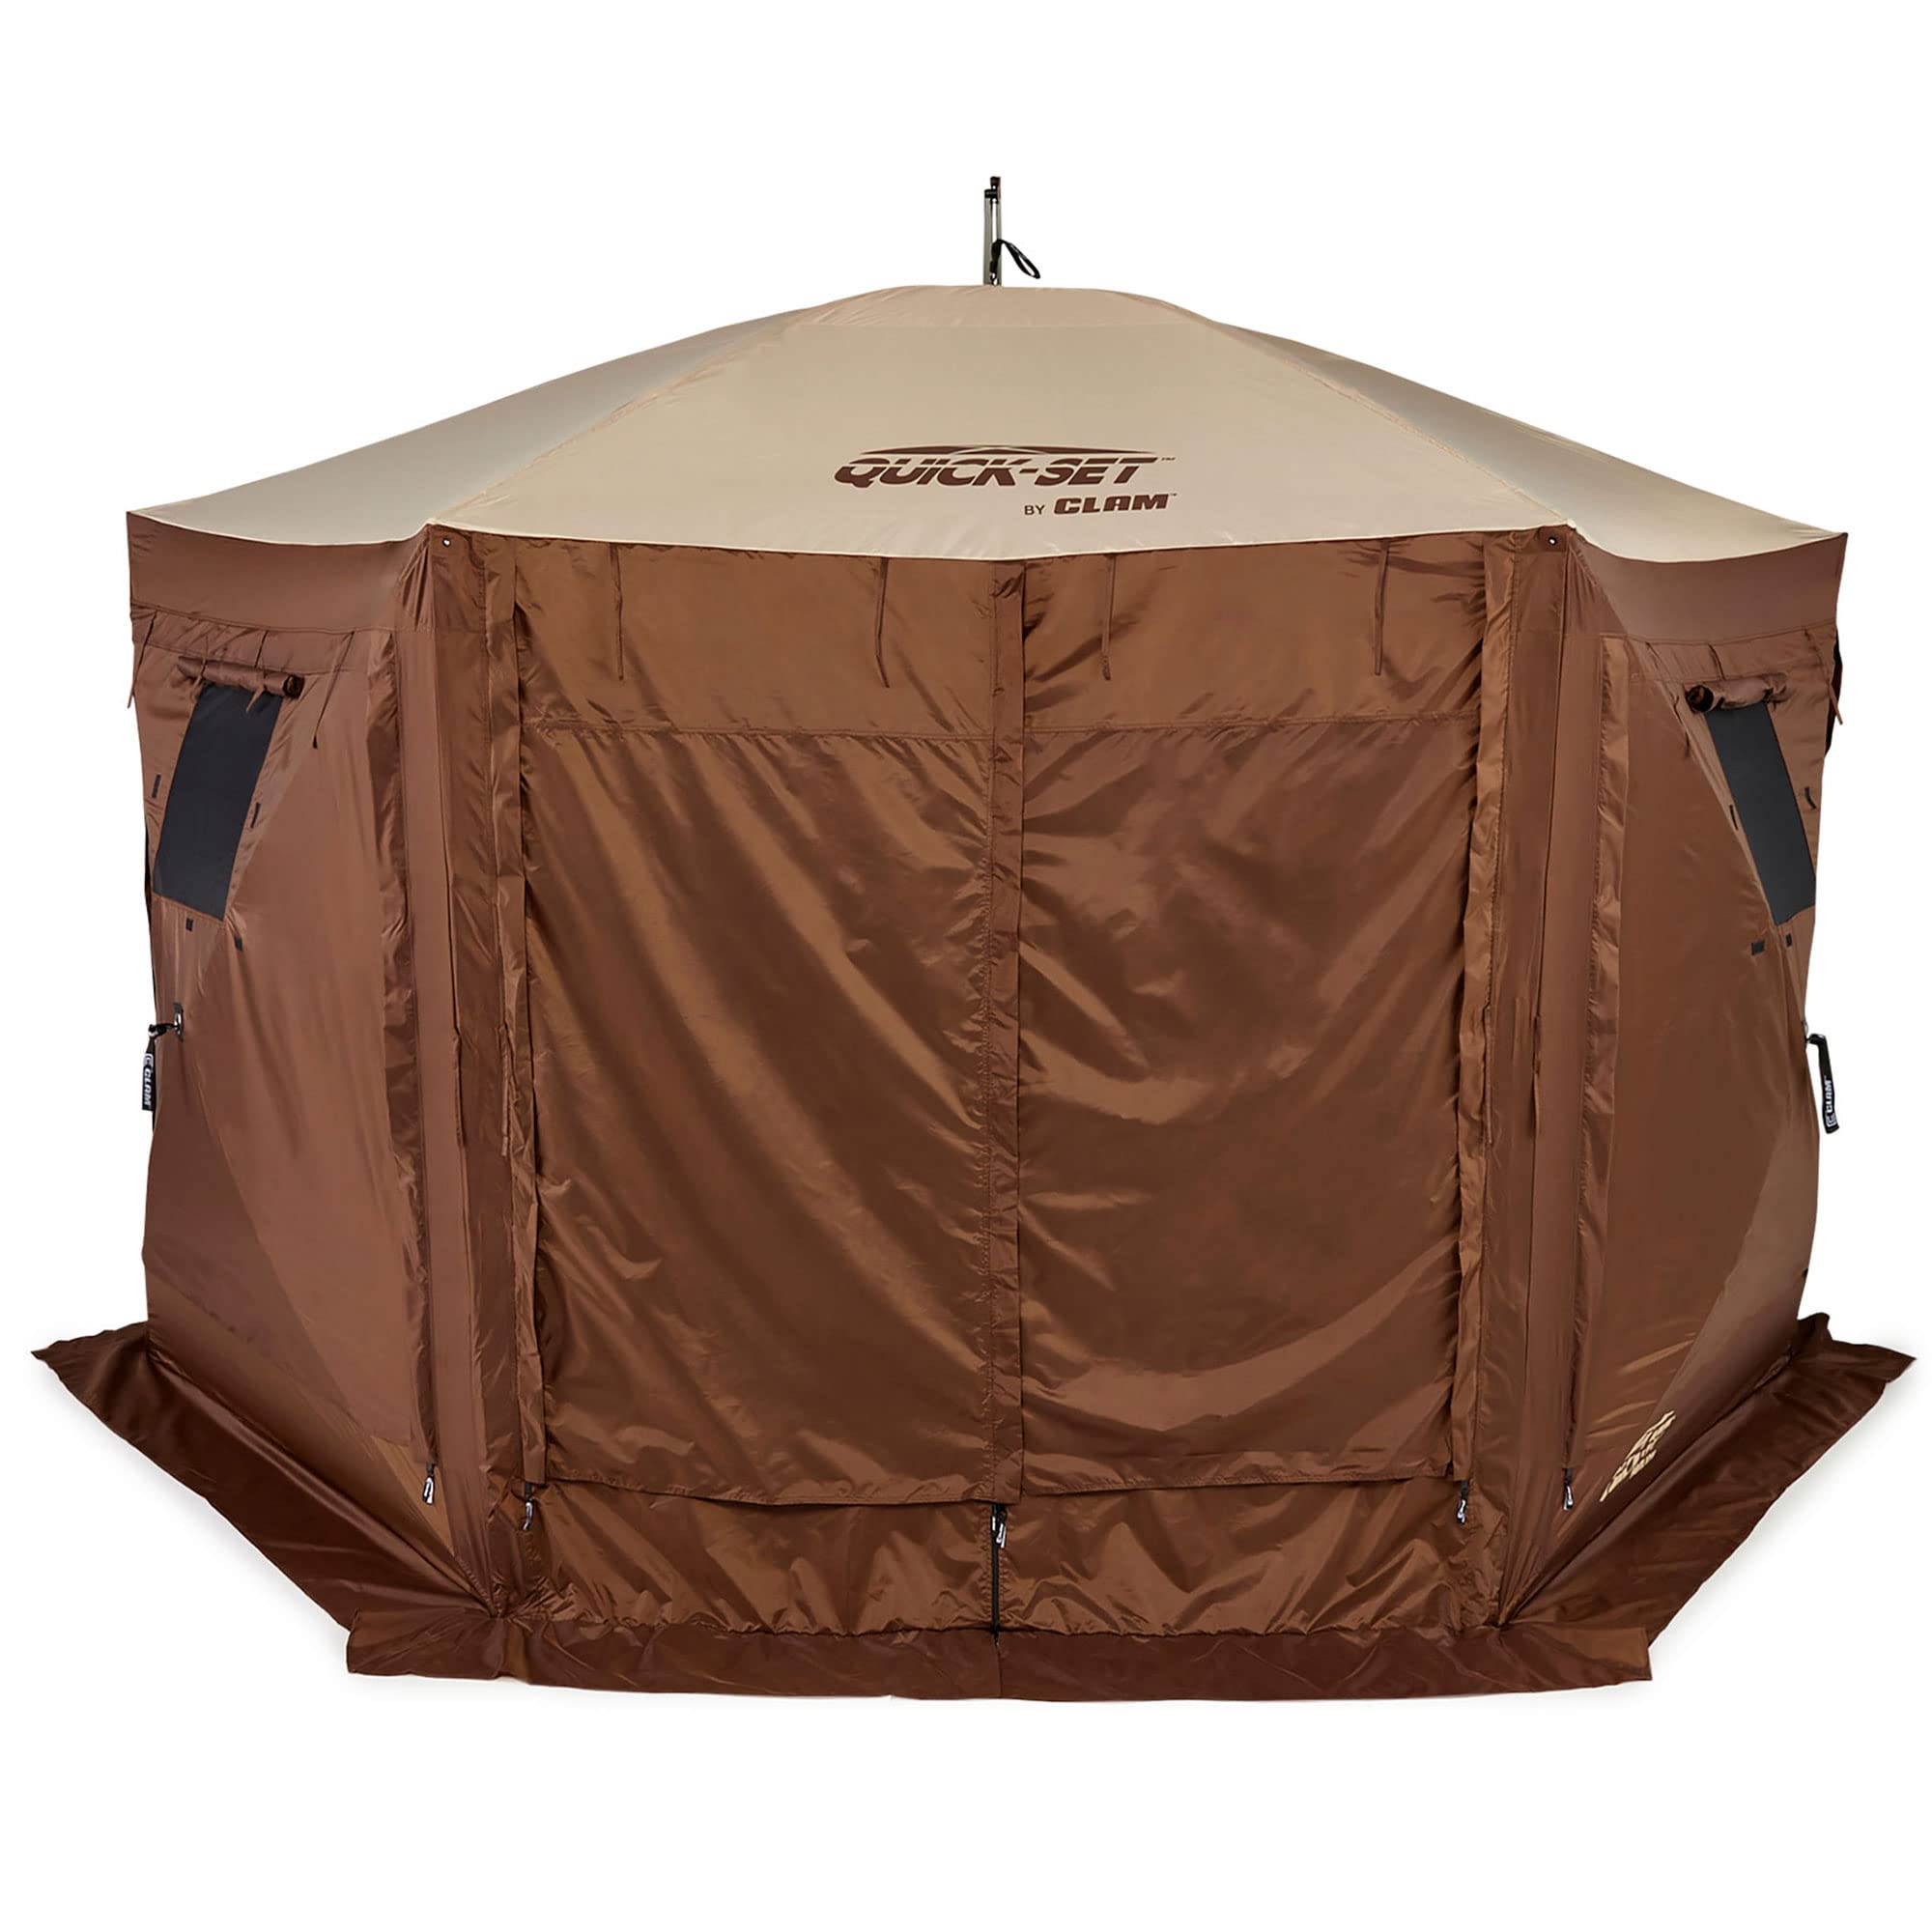 CLAM Quick-Set Pavilion 12.5 x 12.5 Foot Easy Set Up Portable Outdoor Camping Pop Up Canopy Gazebo Shelter with Ground Stakes and Carry Bag, Brown